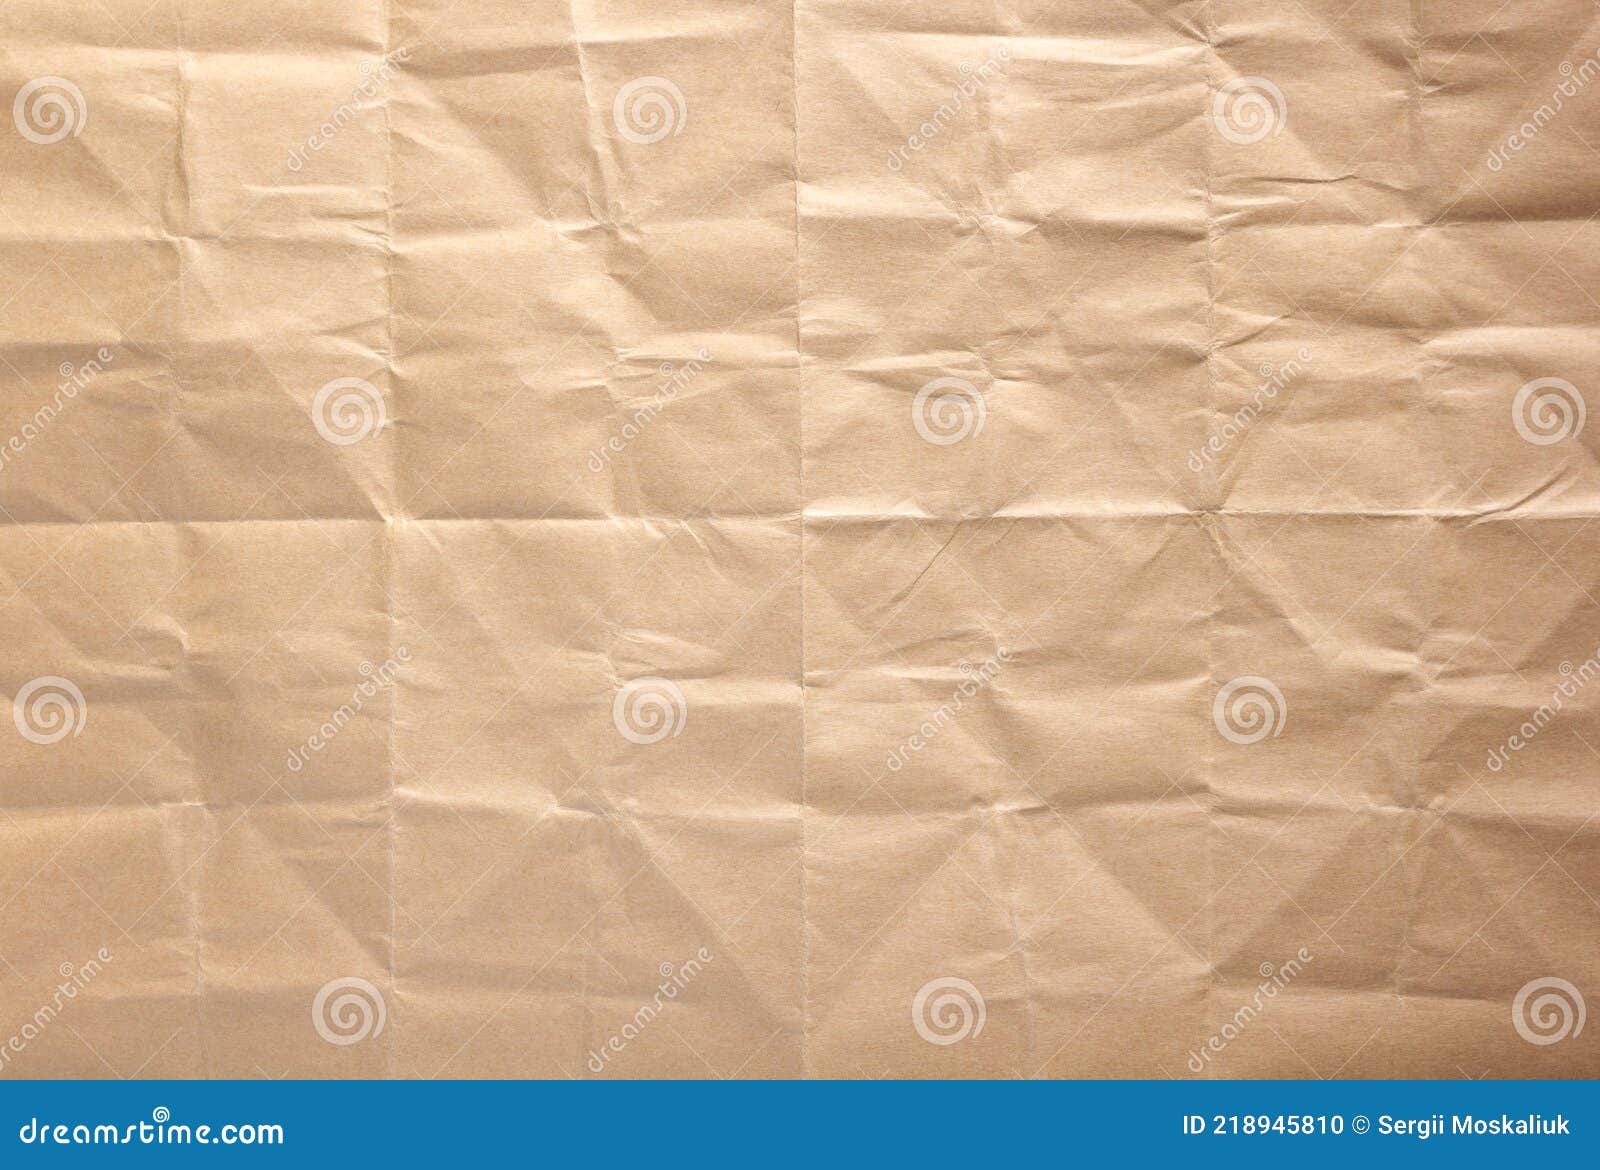 Wrinkled paper texture as background texture. Folded craft paper